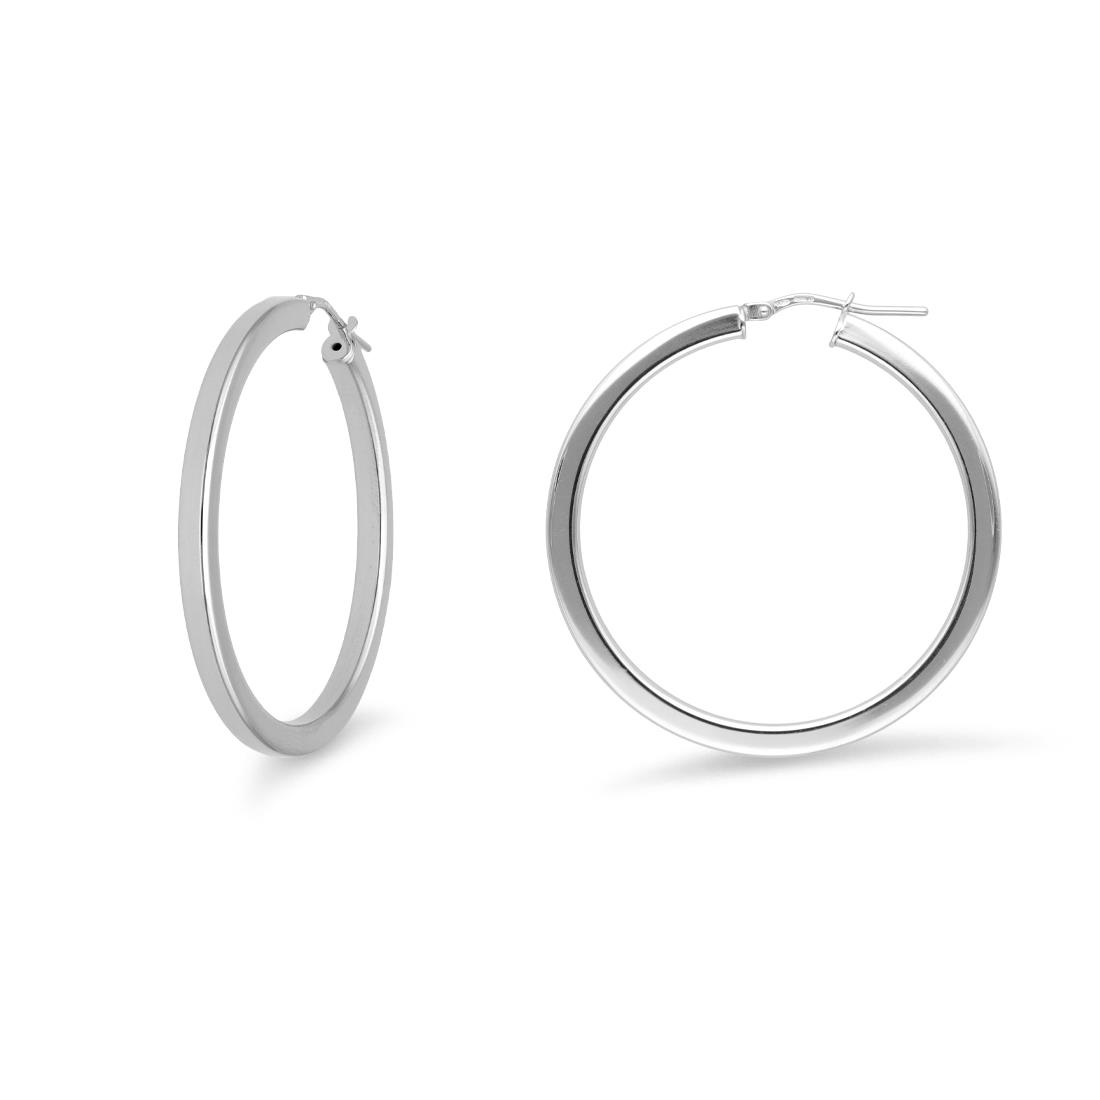 Thick hoop earrings Hula Hoop collection in rhodium-plated 925 silver - LUXURY MILANO